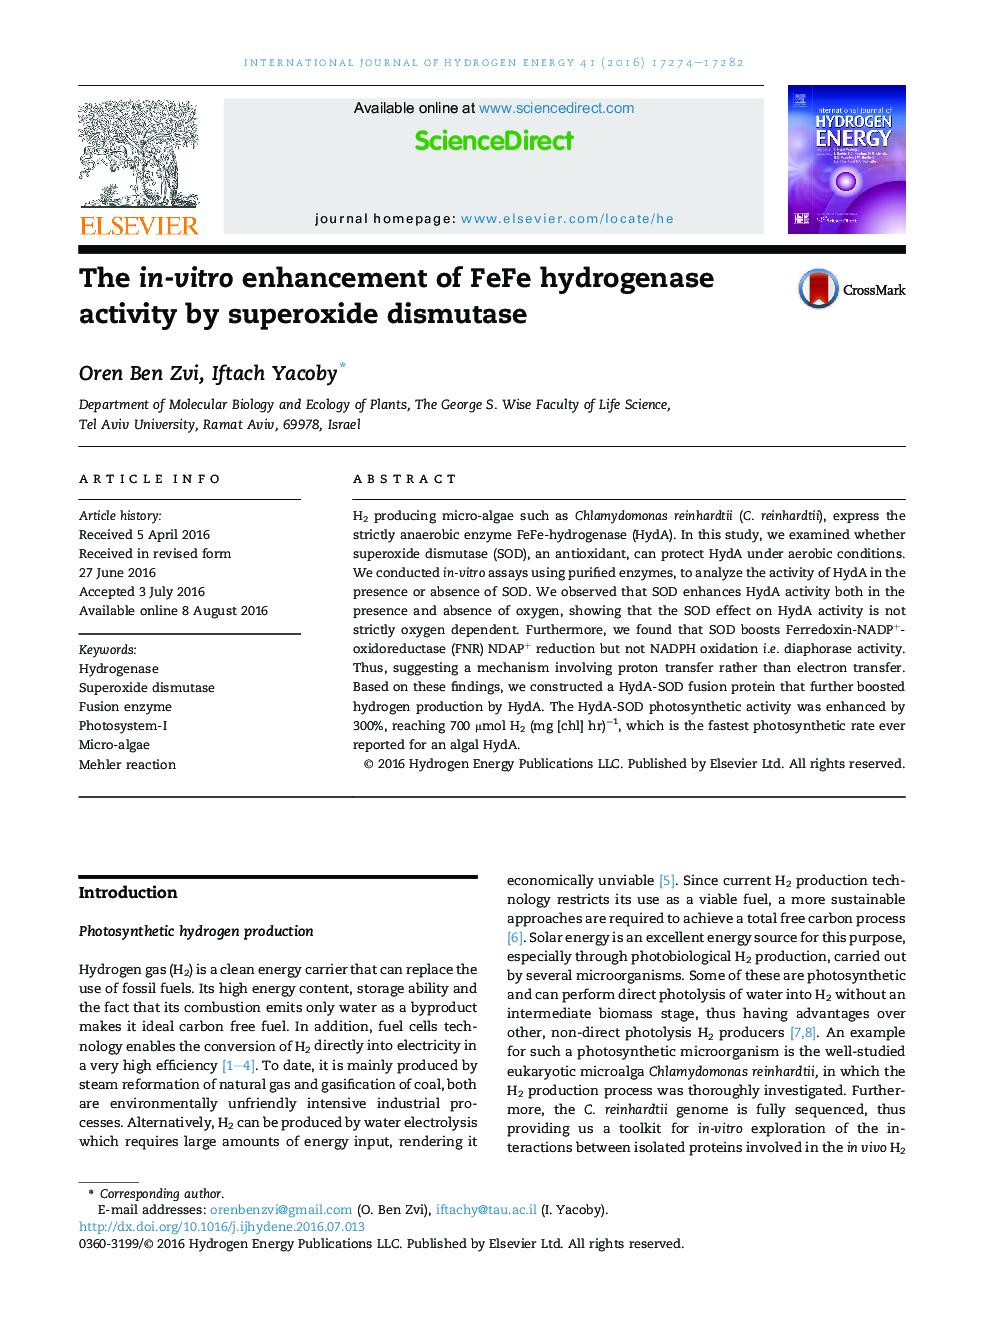 The in-vitro enhancement of FeFe hydrogenase activity by superoxide dismutase